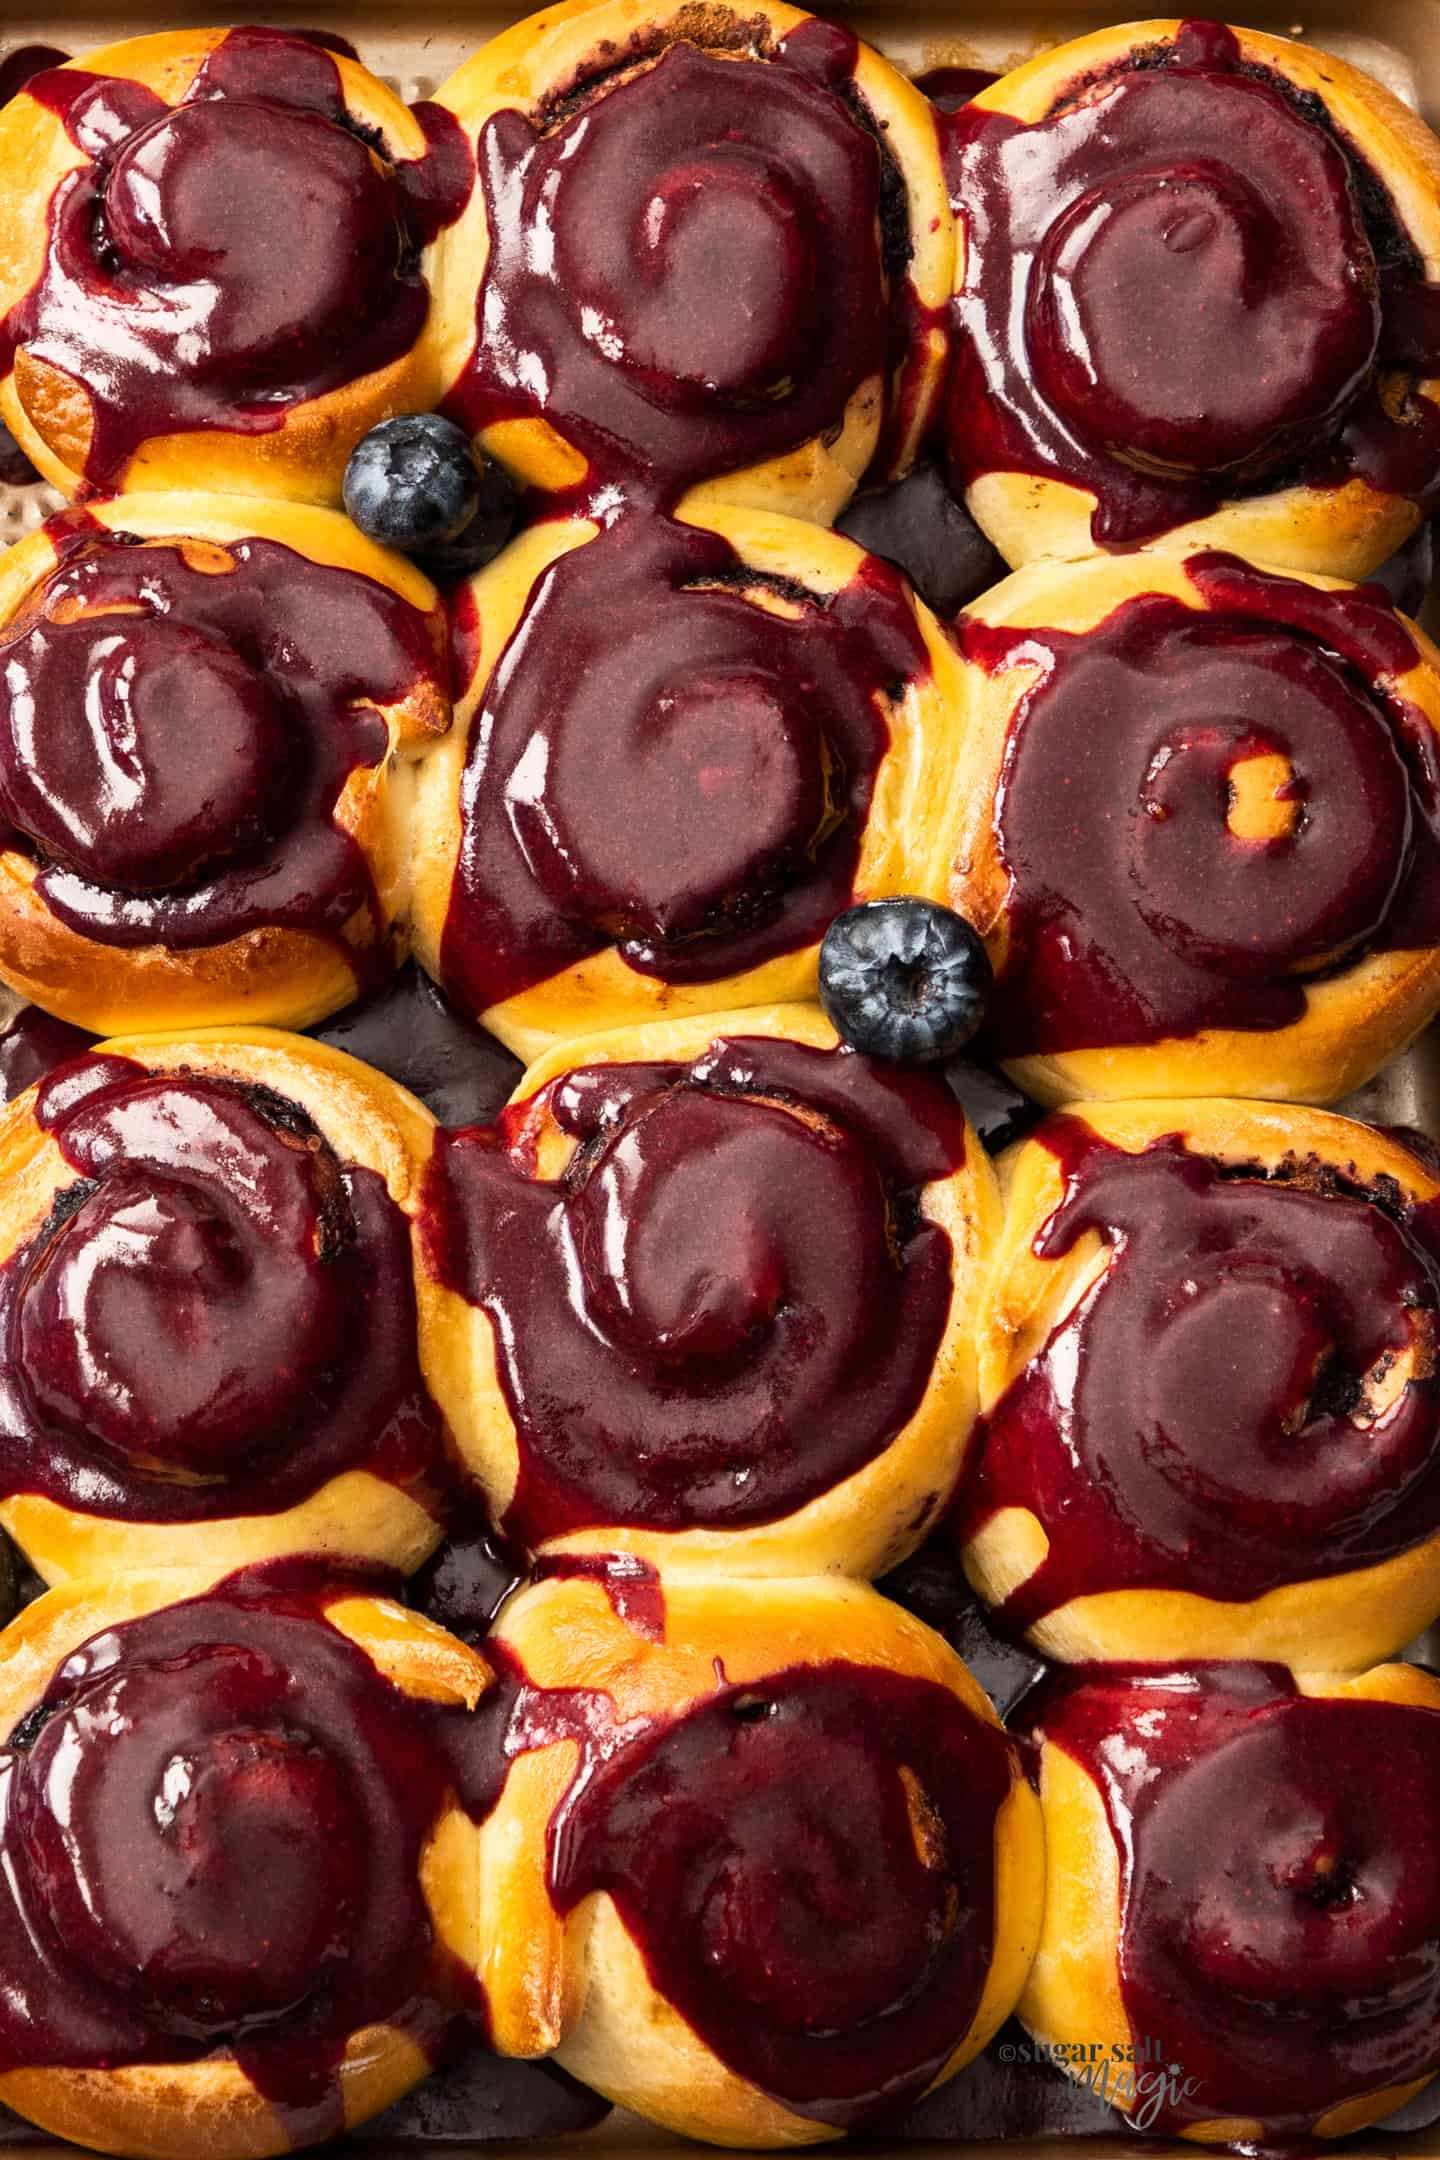 Top down, closeup view of 12 blueberry cinnamon rolls on a baking tray.